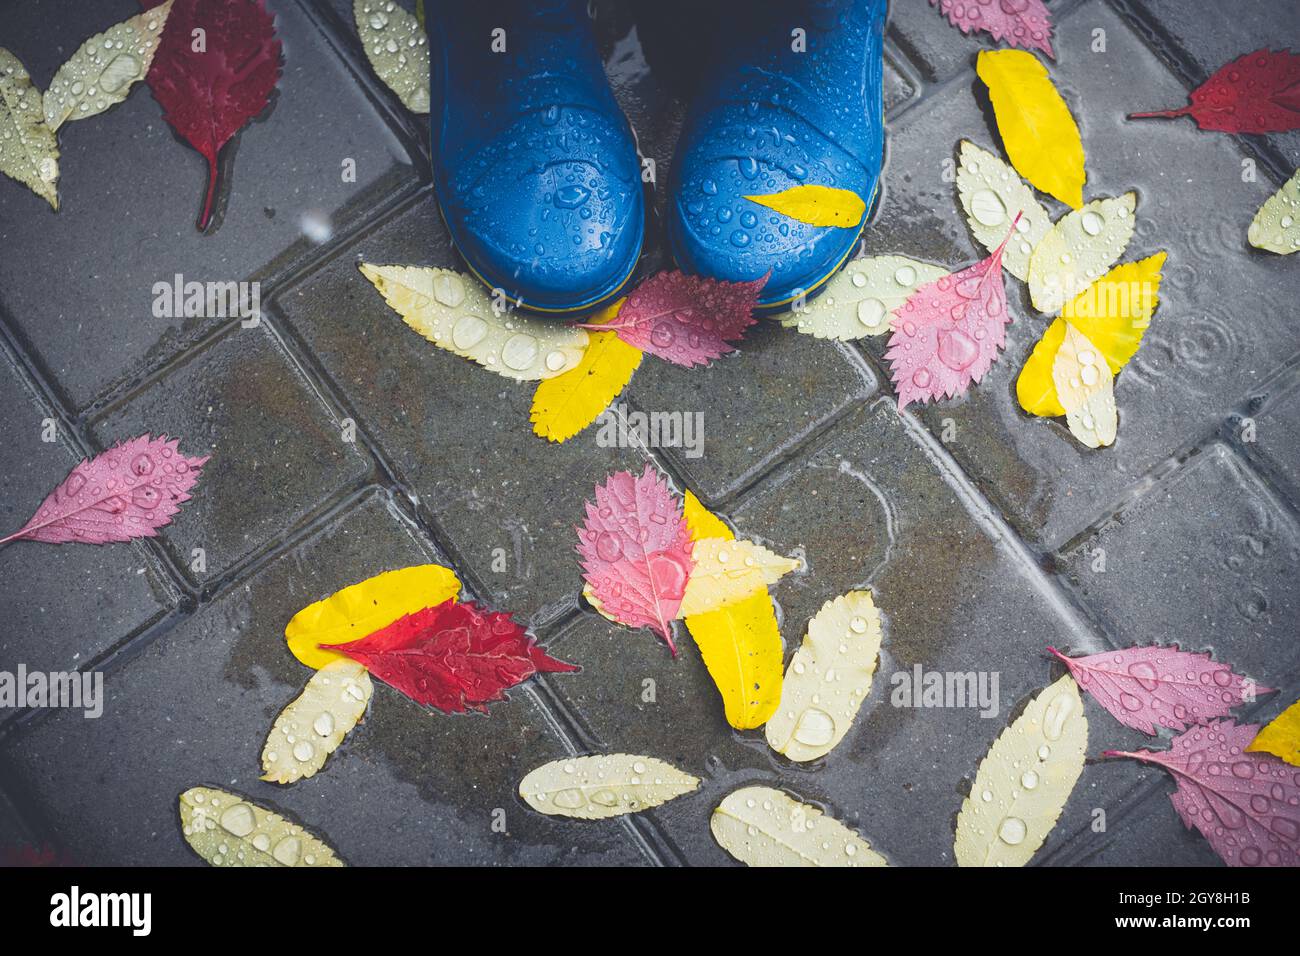 Feet in blue rubber boots standing in a wet concrete paving with autumn leaves in rain with umbrella shade. Autumn fall concept Stock Photo